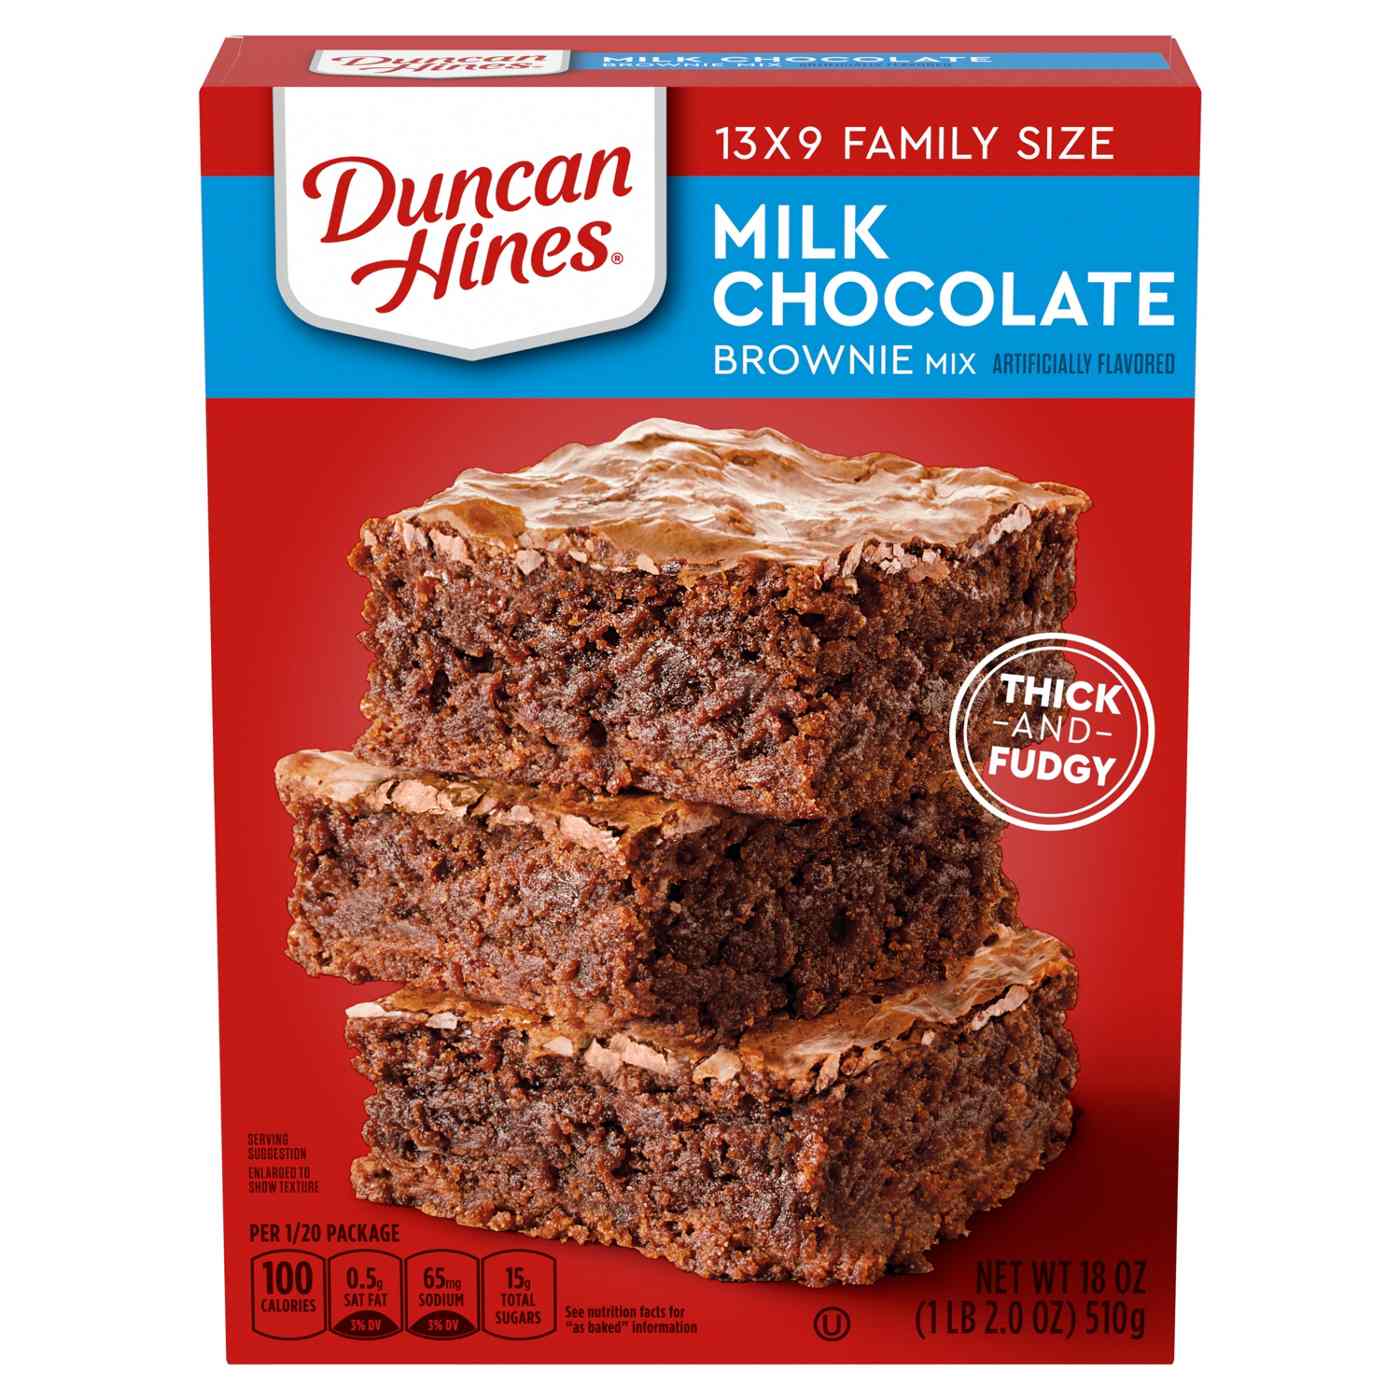 Duncan Hines Classic Milk Chocolate Brownie Mix; image 1 of 7